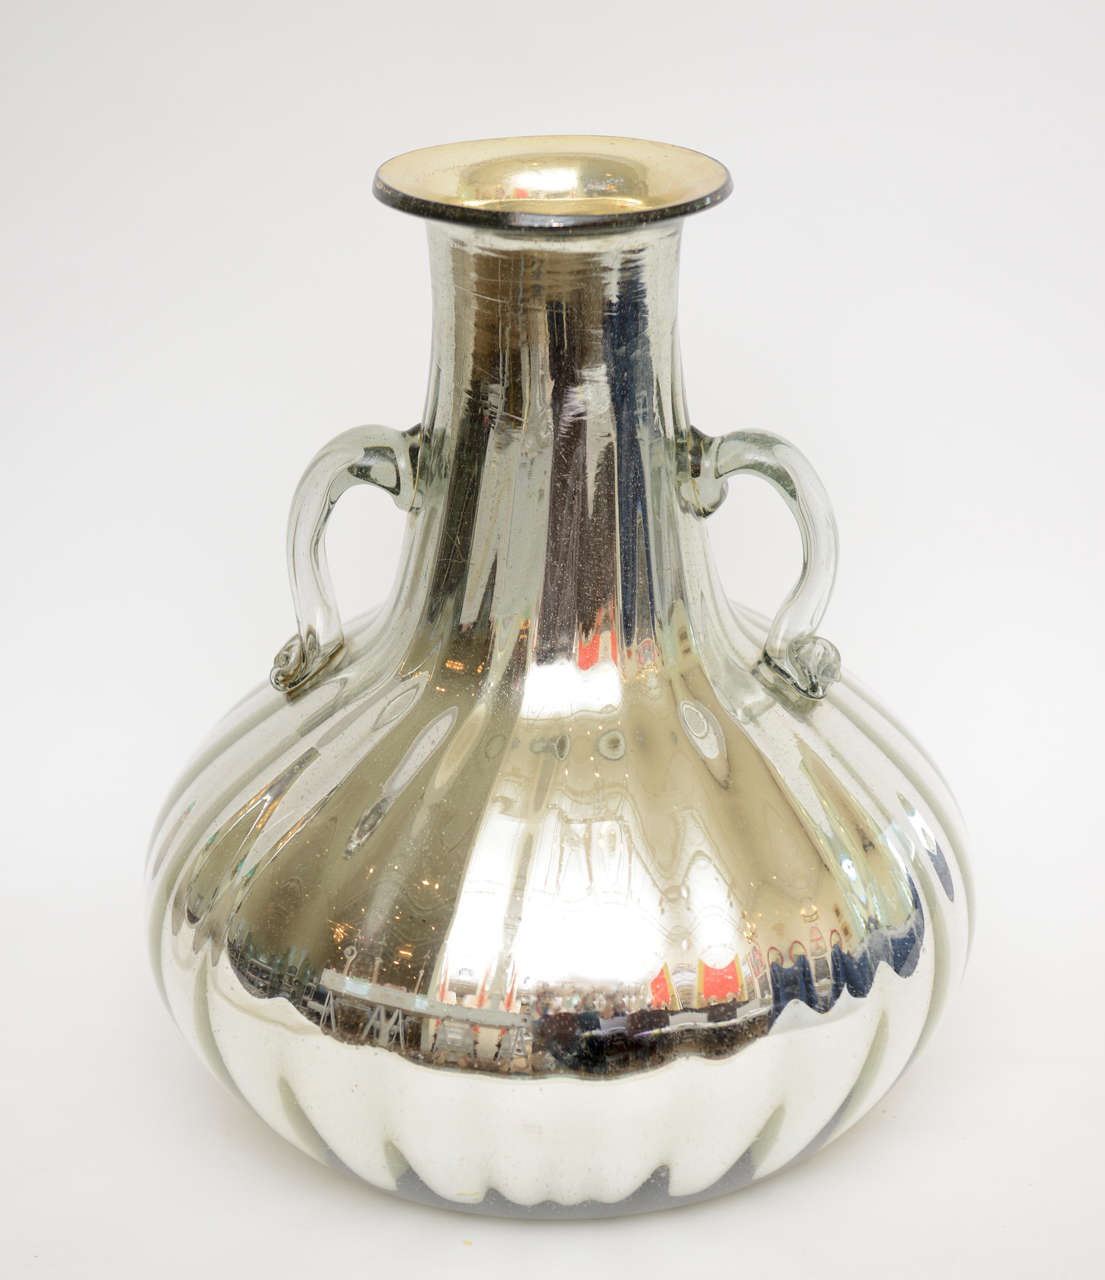 This monumental mercury silver over the top jug/bottle/vase/vessel has clear glass handles. It has a great presence as a great object.
Great object that picks up light  and reflects the room.